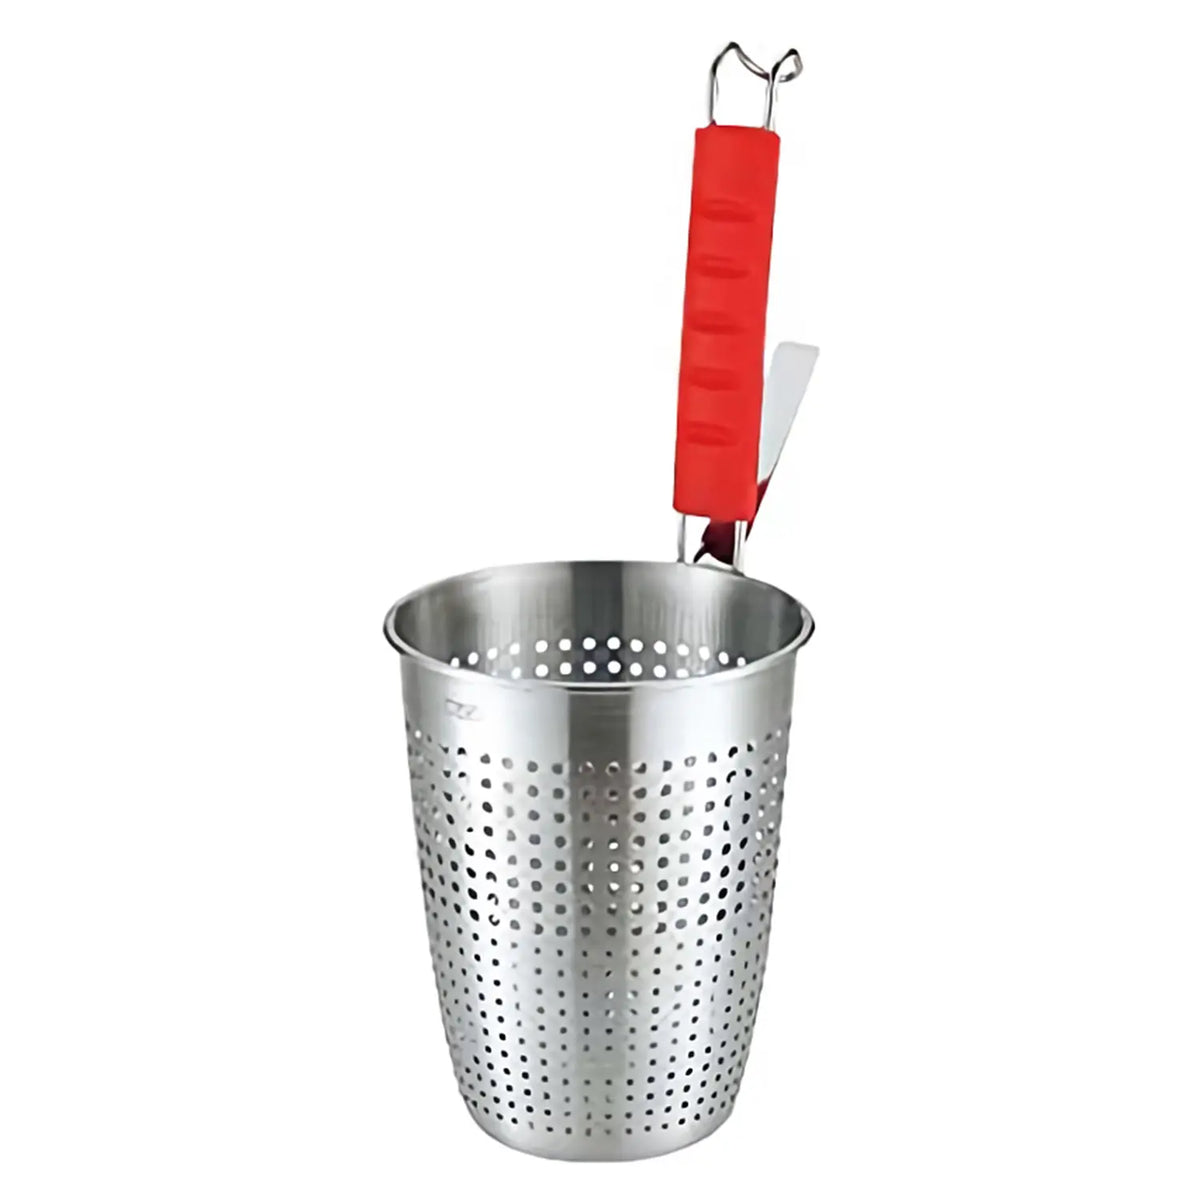 YUKIWA Stainless Steel Tebo Noodle Strainer with Silicone Handle